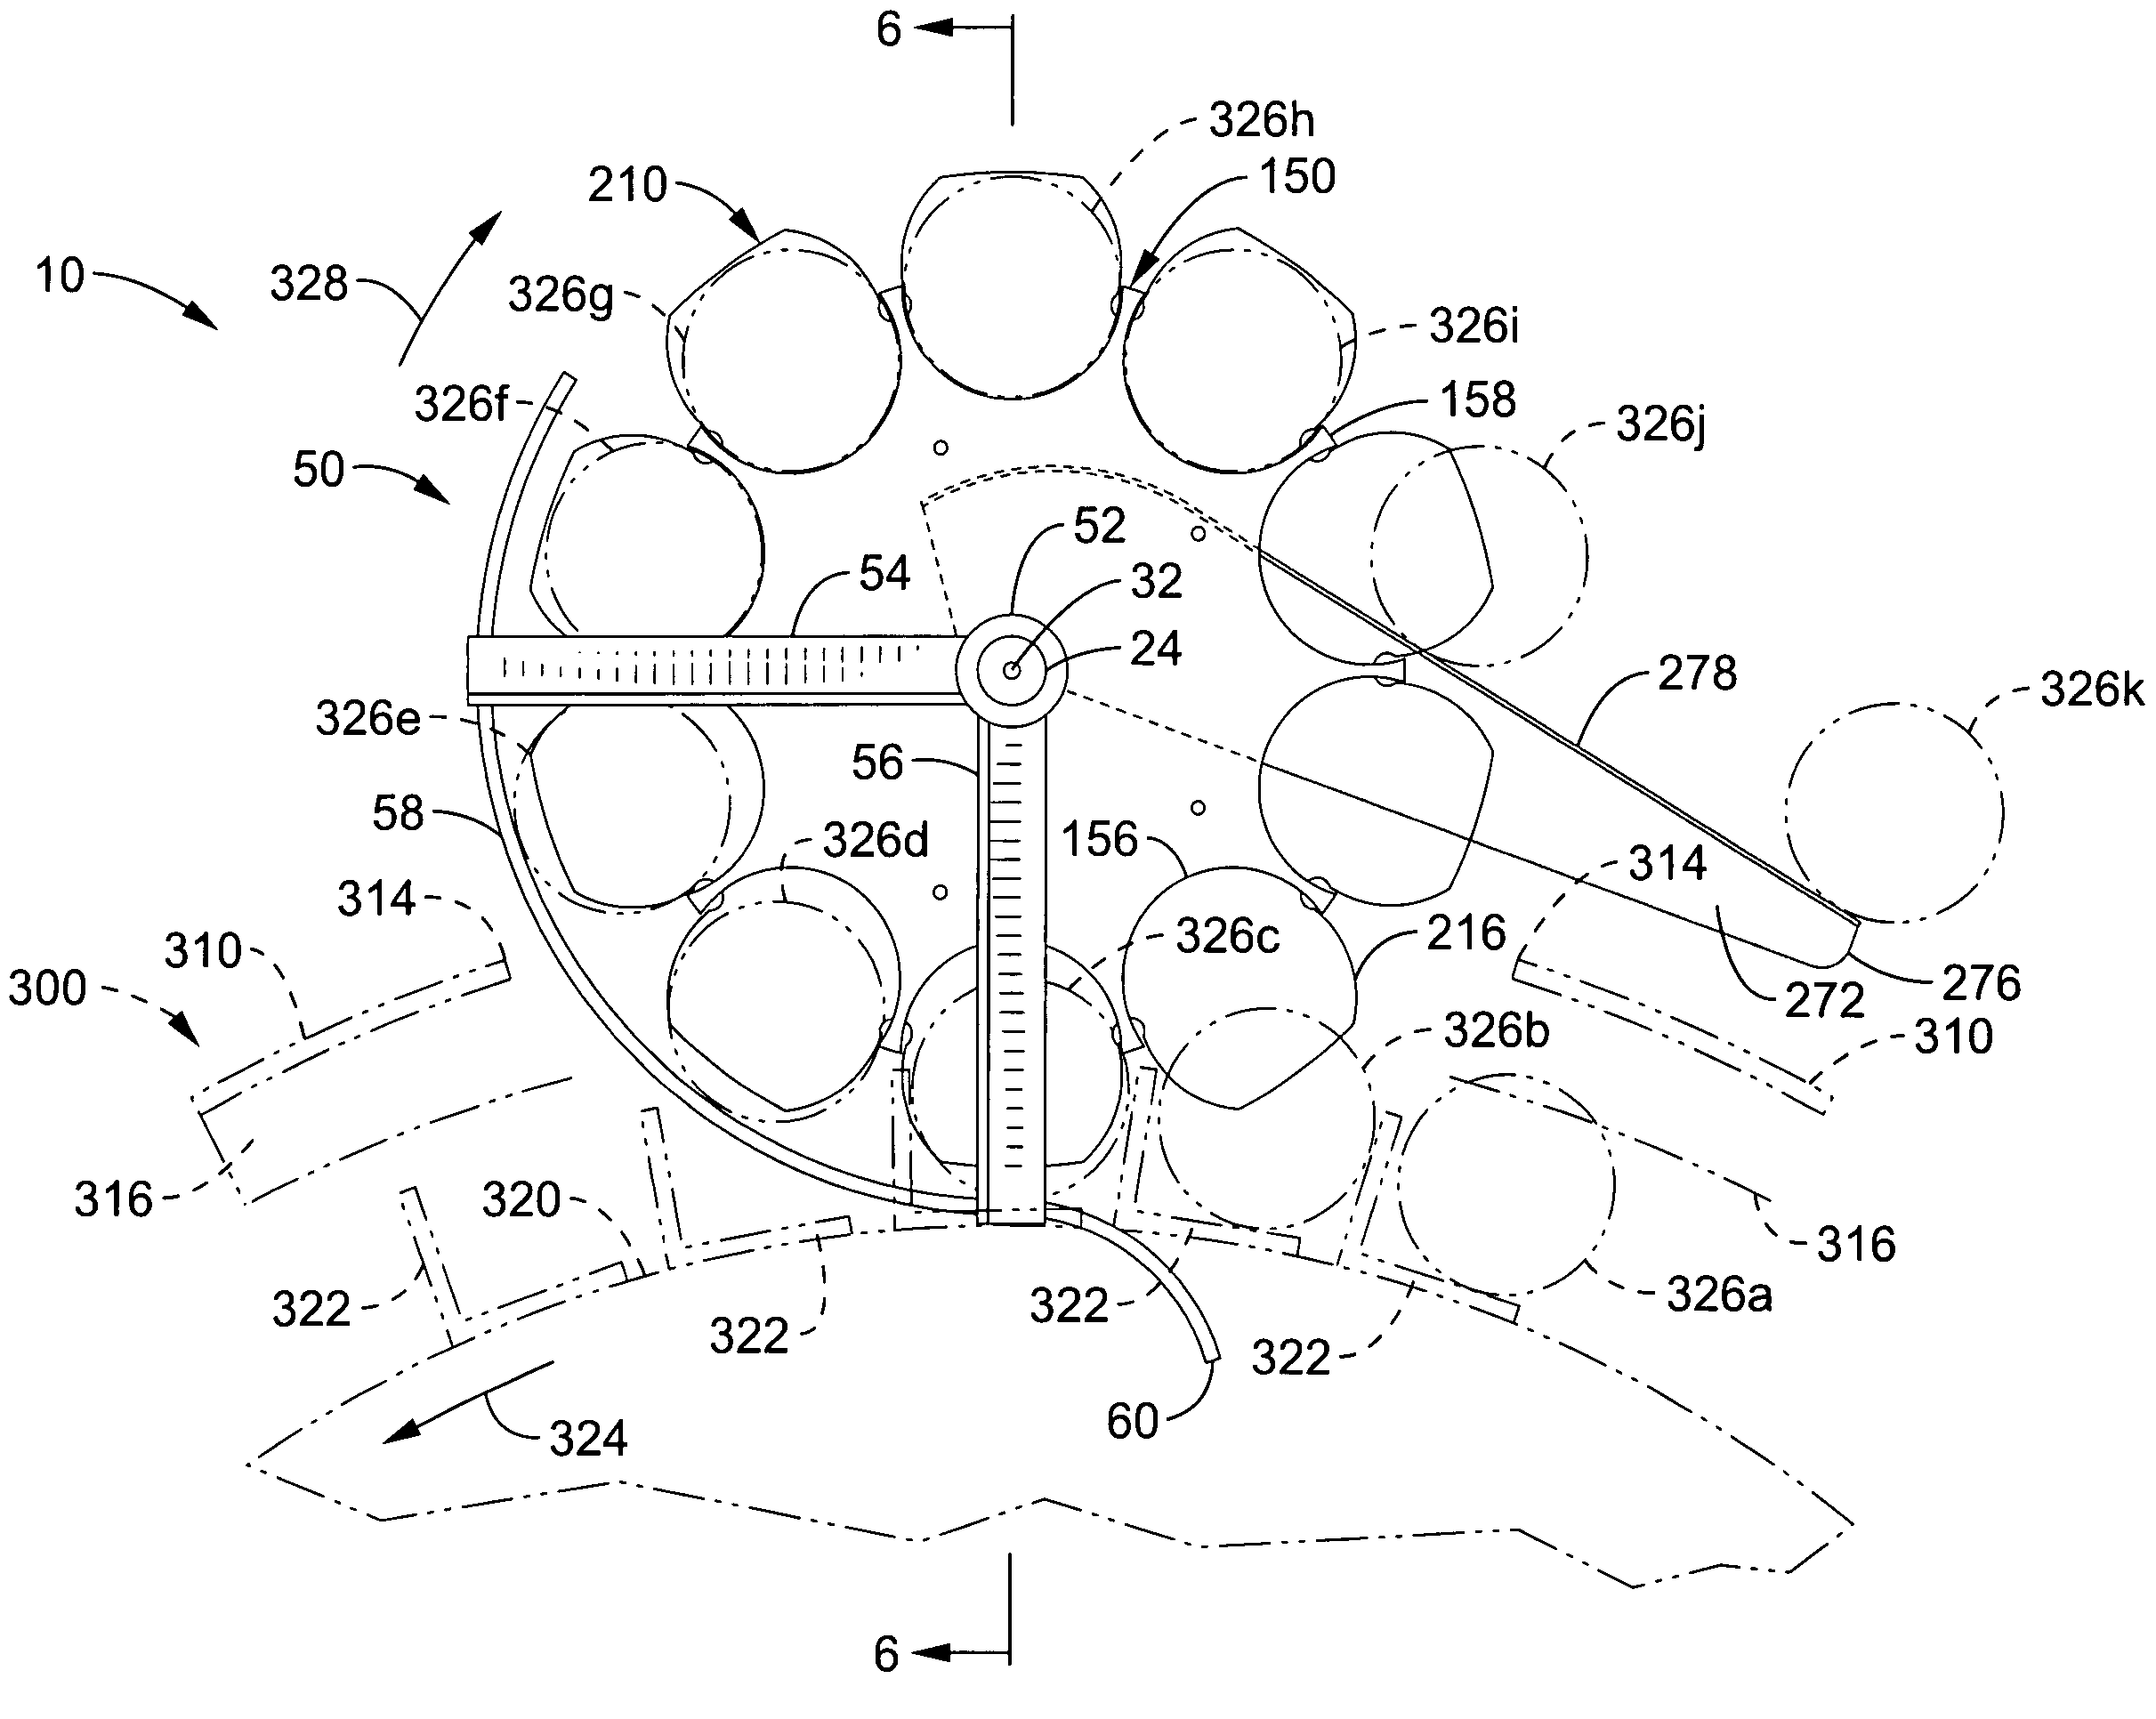 Can extractor apparatus